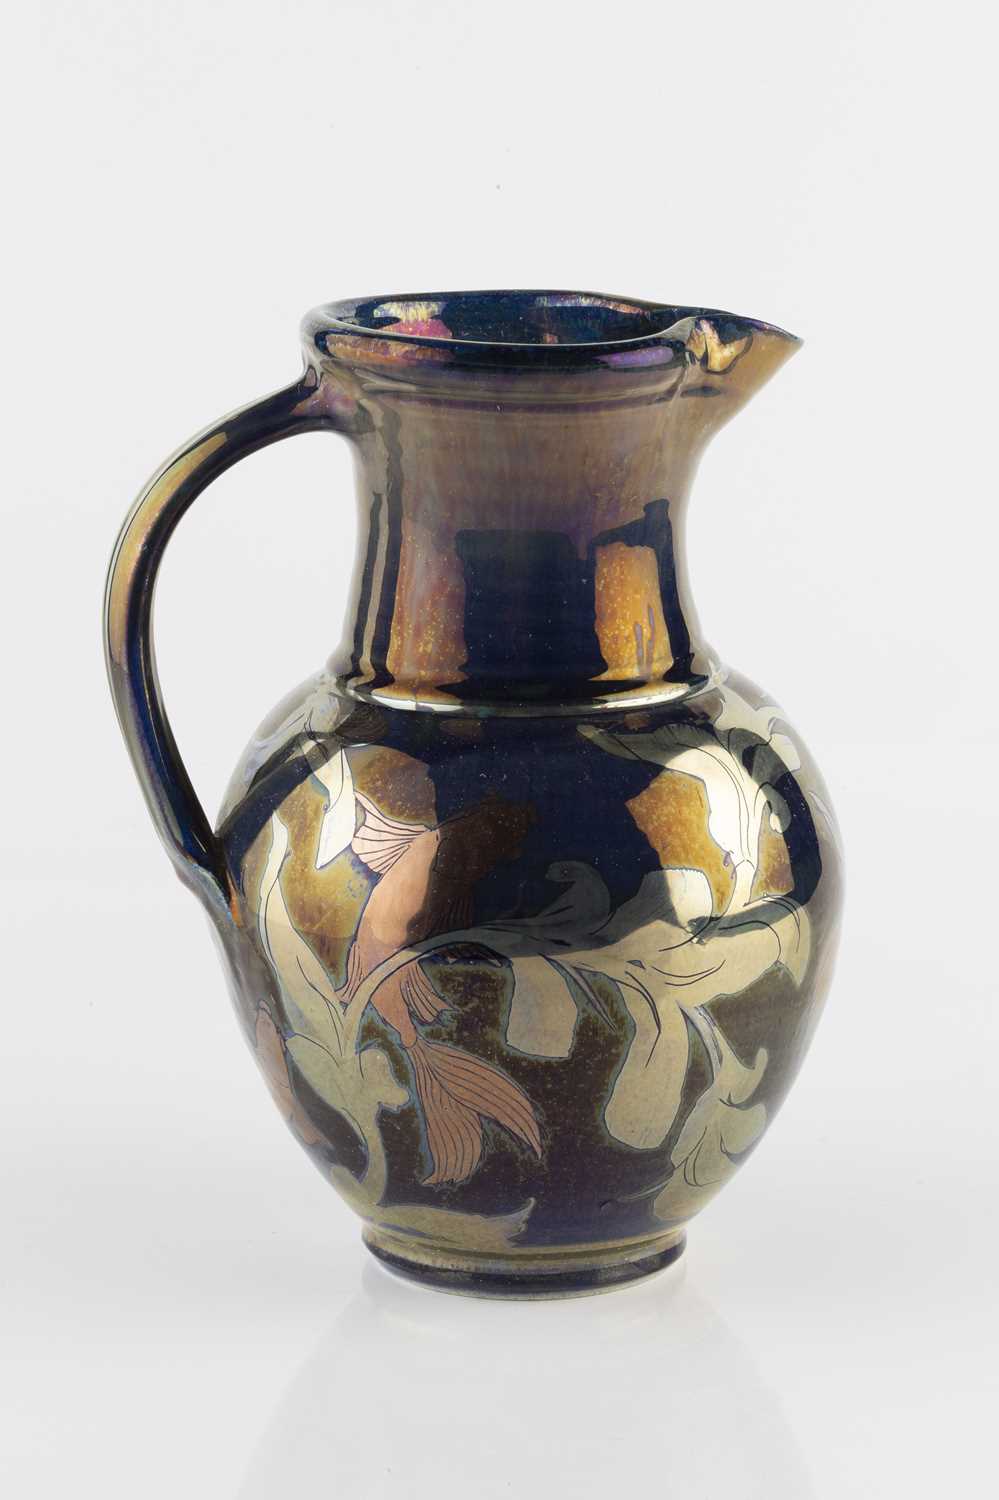 Jonathan Chiswell Jones (b.1944) Jug reduction fired lustre in gold with blue divisions, with fish - Image 2 of 3